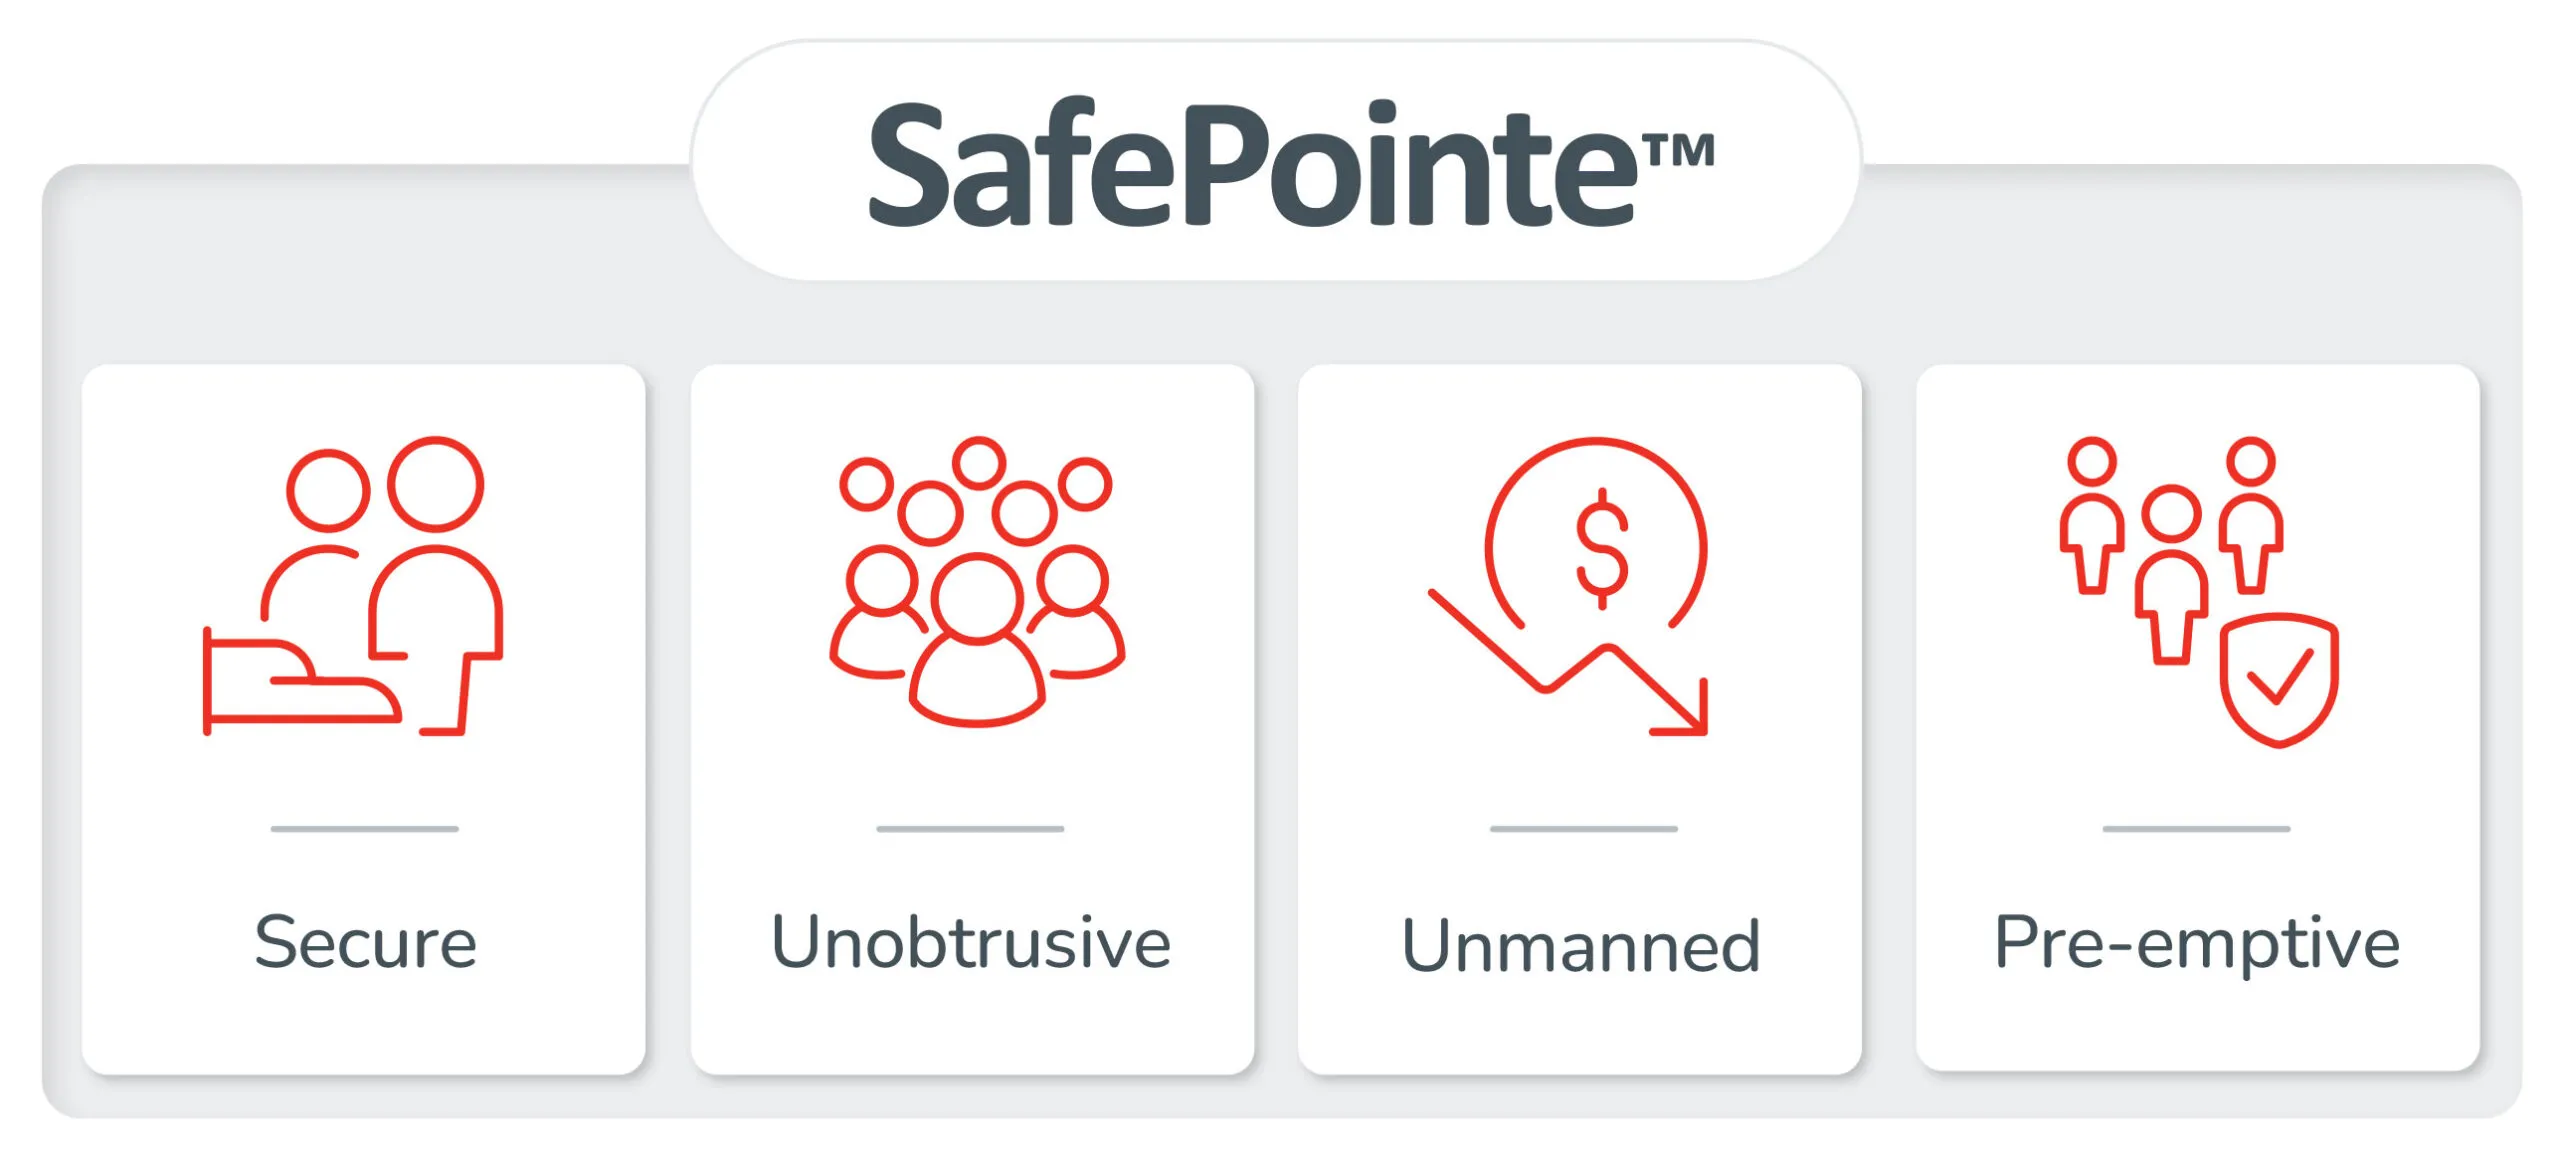 a screen shot of the safepointe app